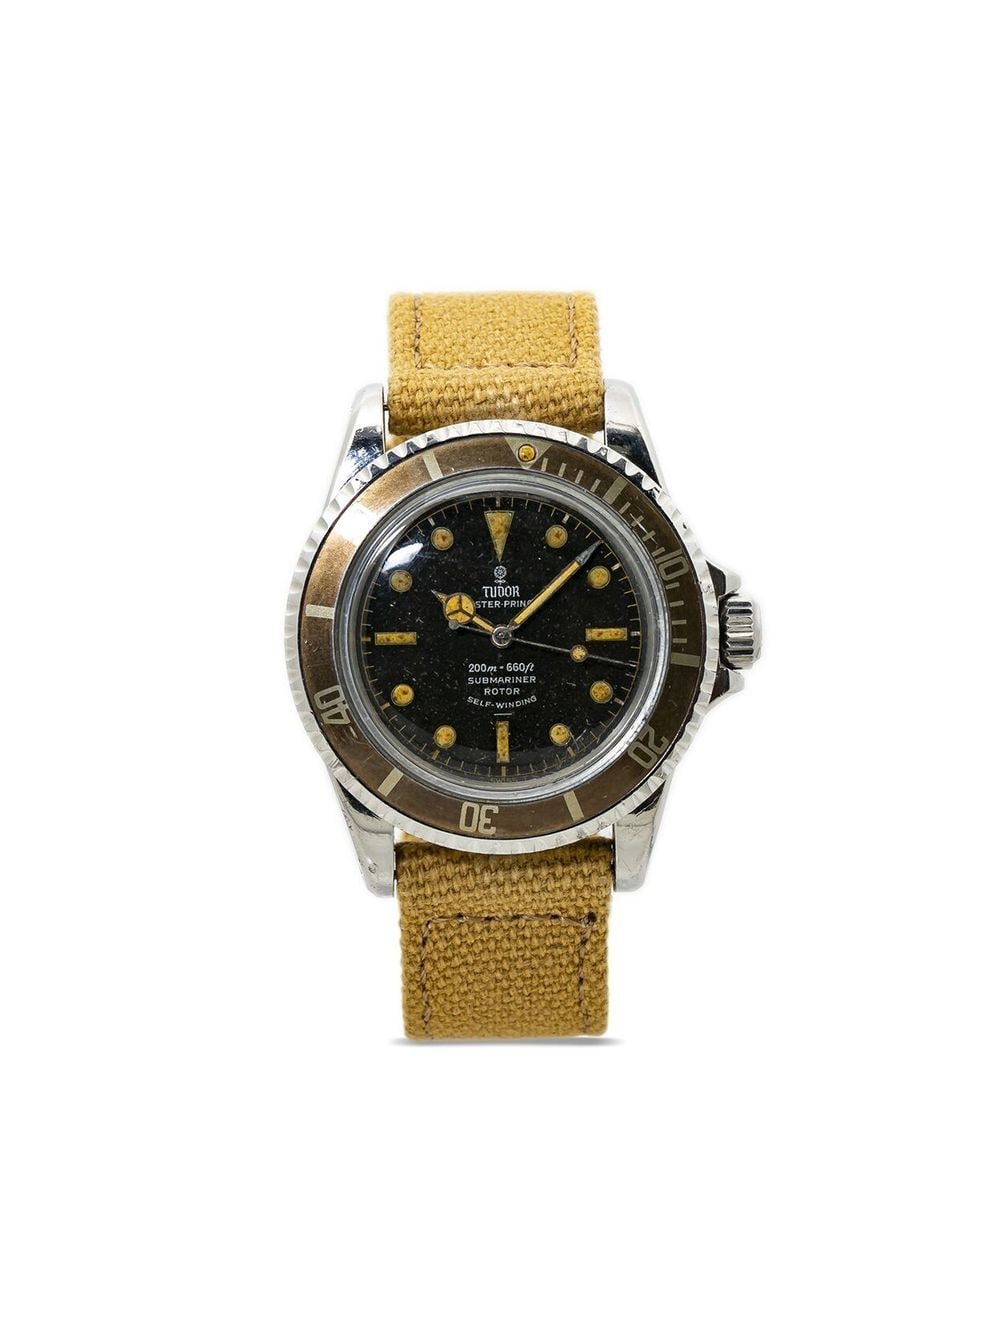 pre-owned Oyster Prince Submariner 40mm